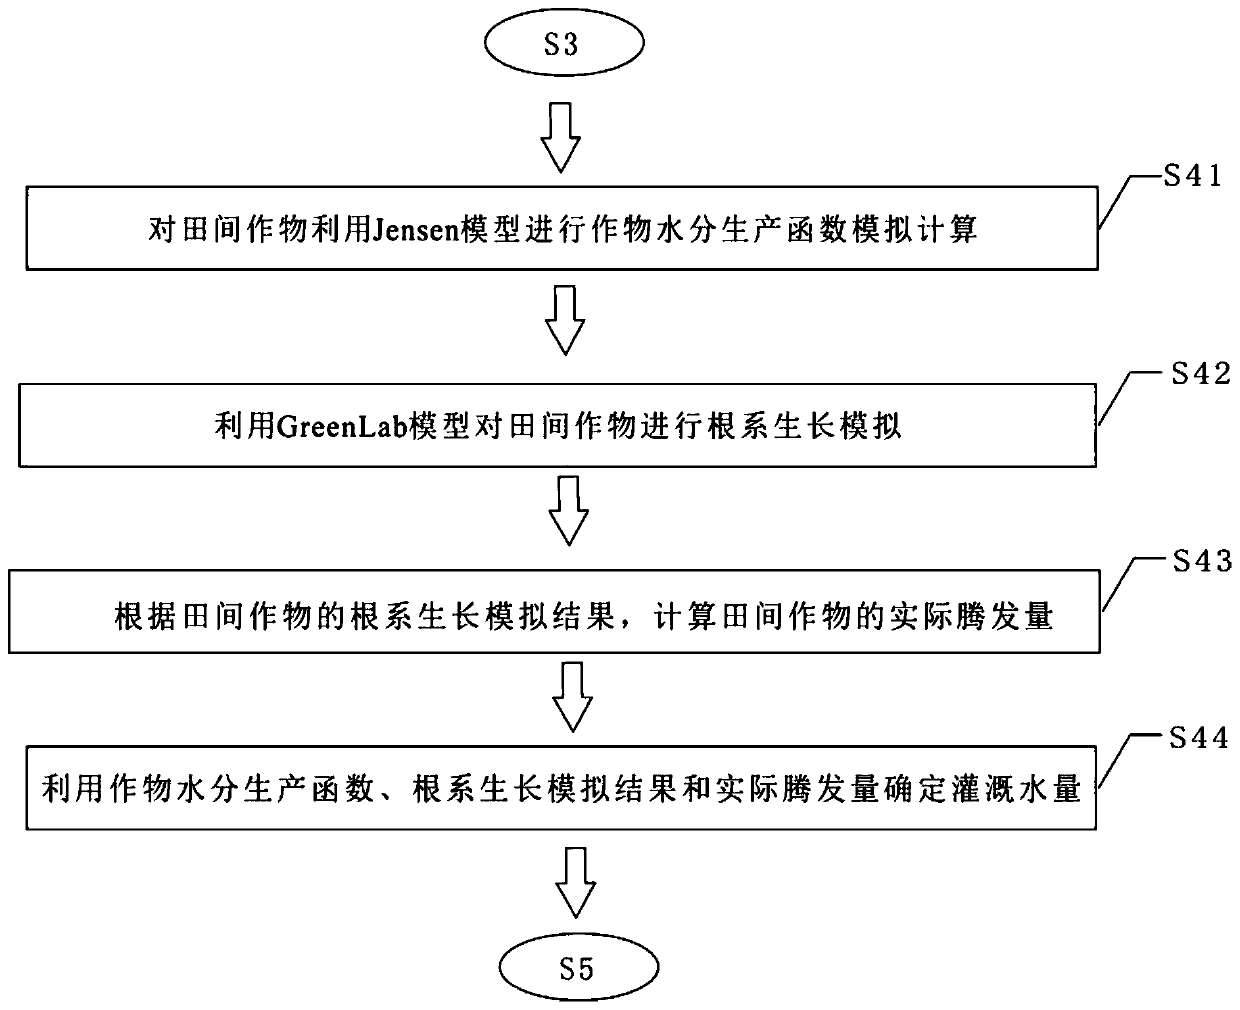 Field water resource optimal allocation method for reservoir irrigation area